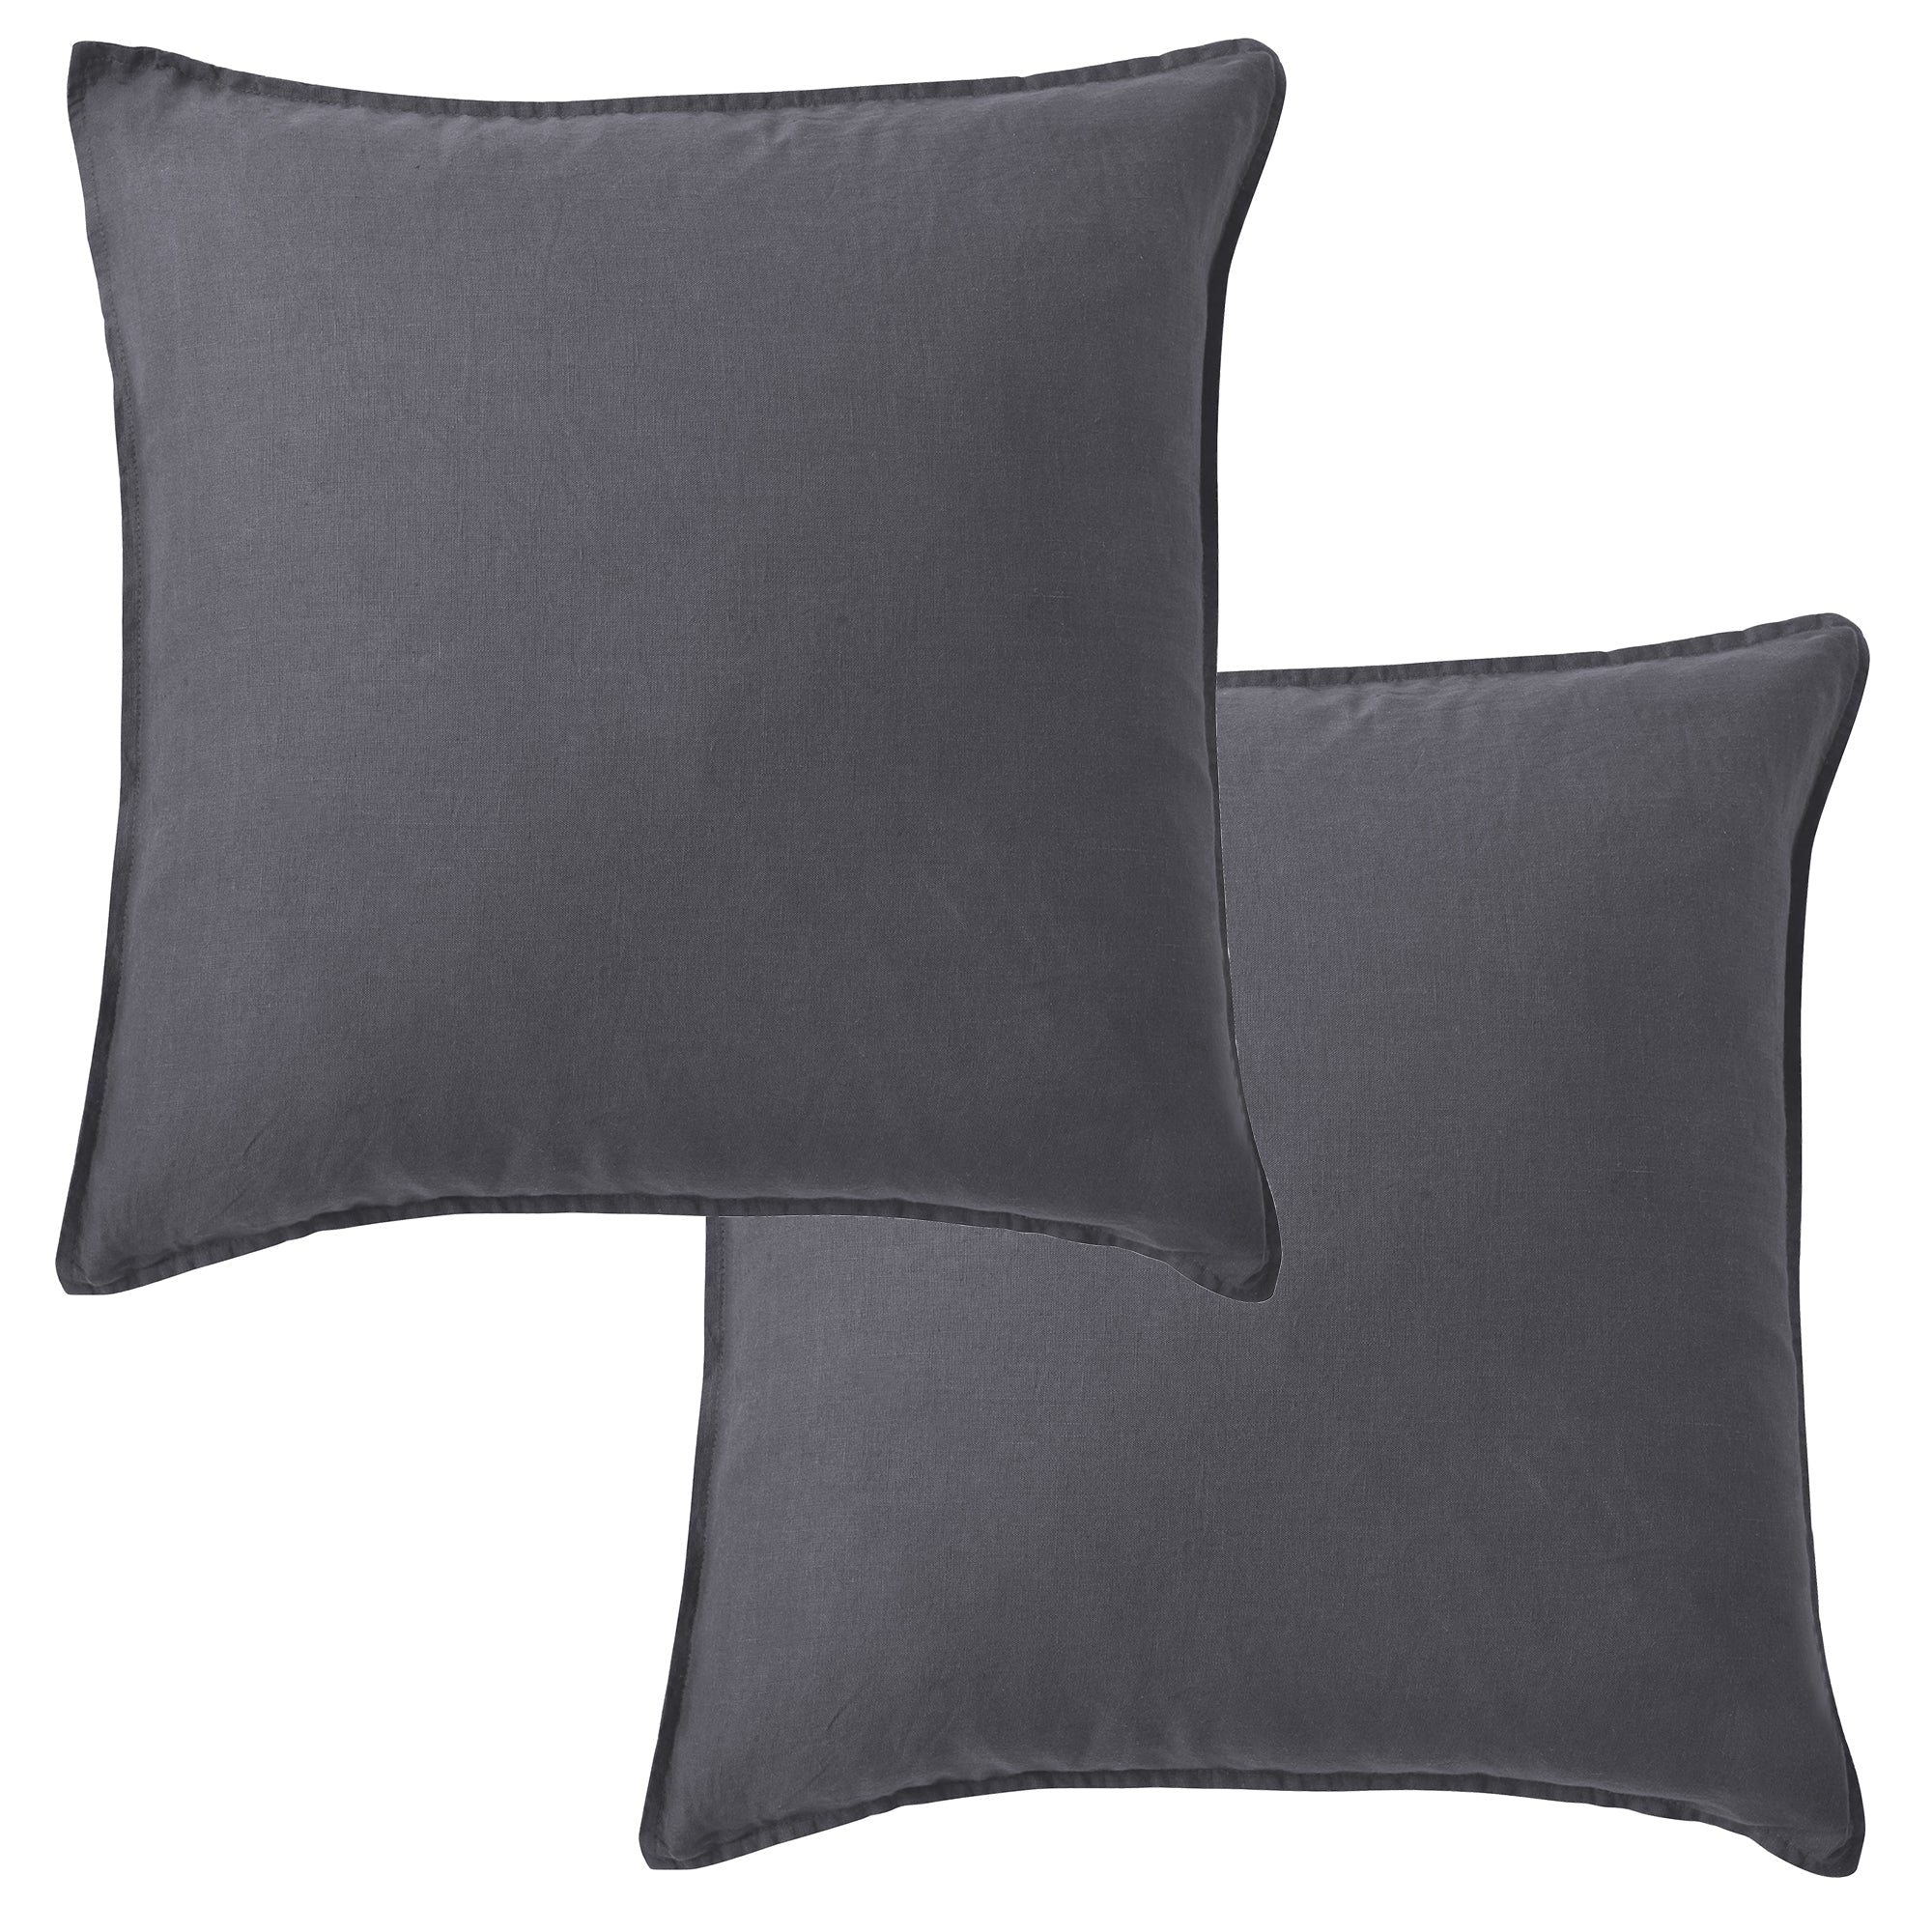 Washed Linen Square Pillow Cover- Set of 2